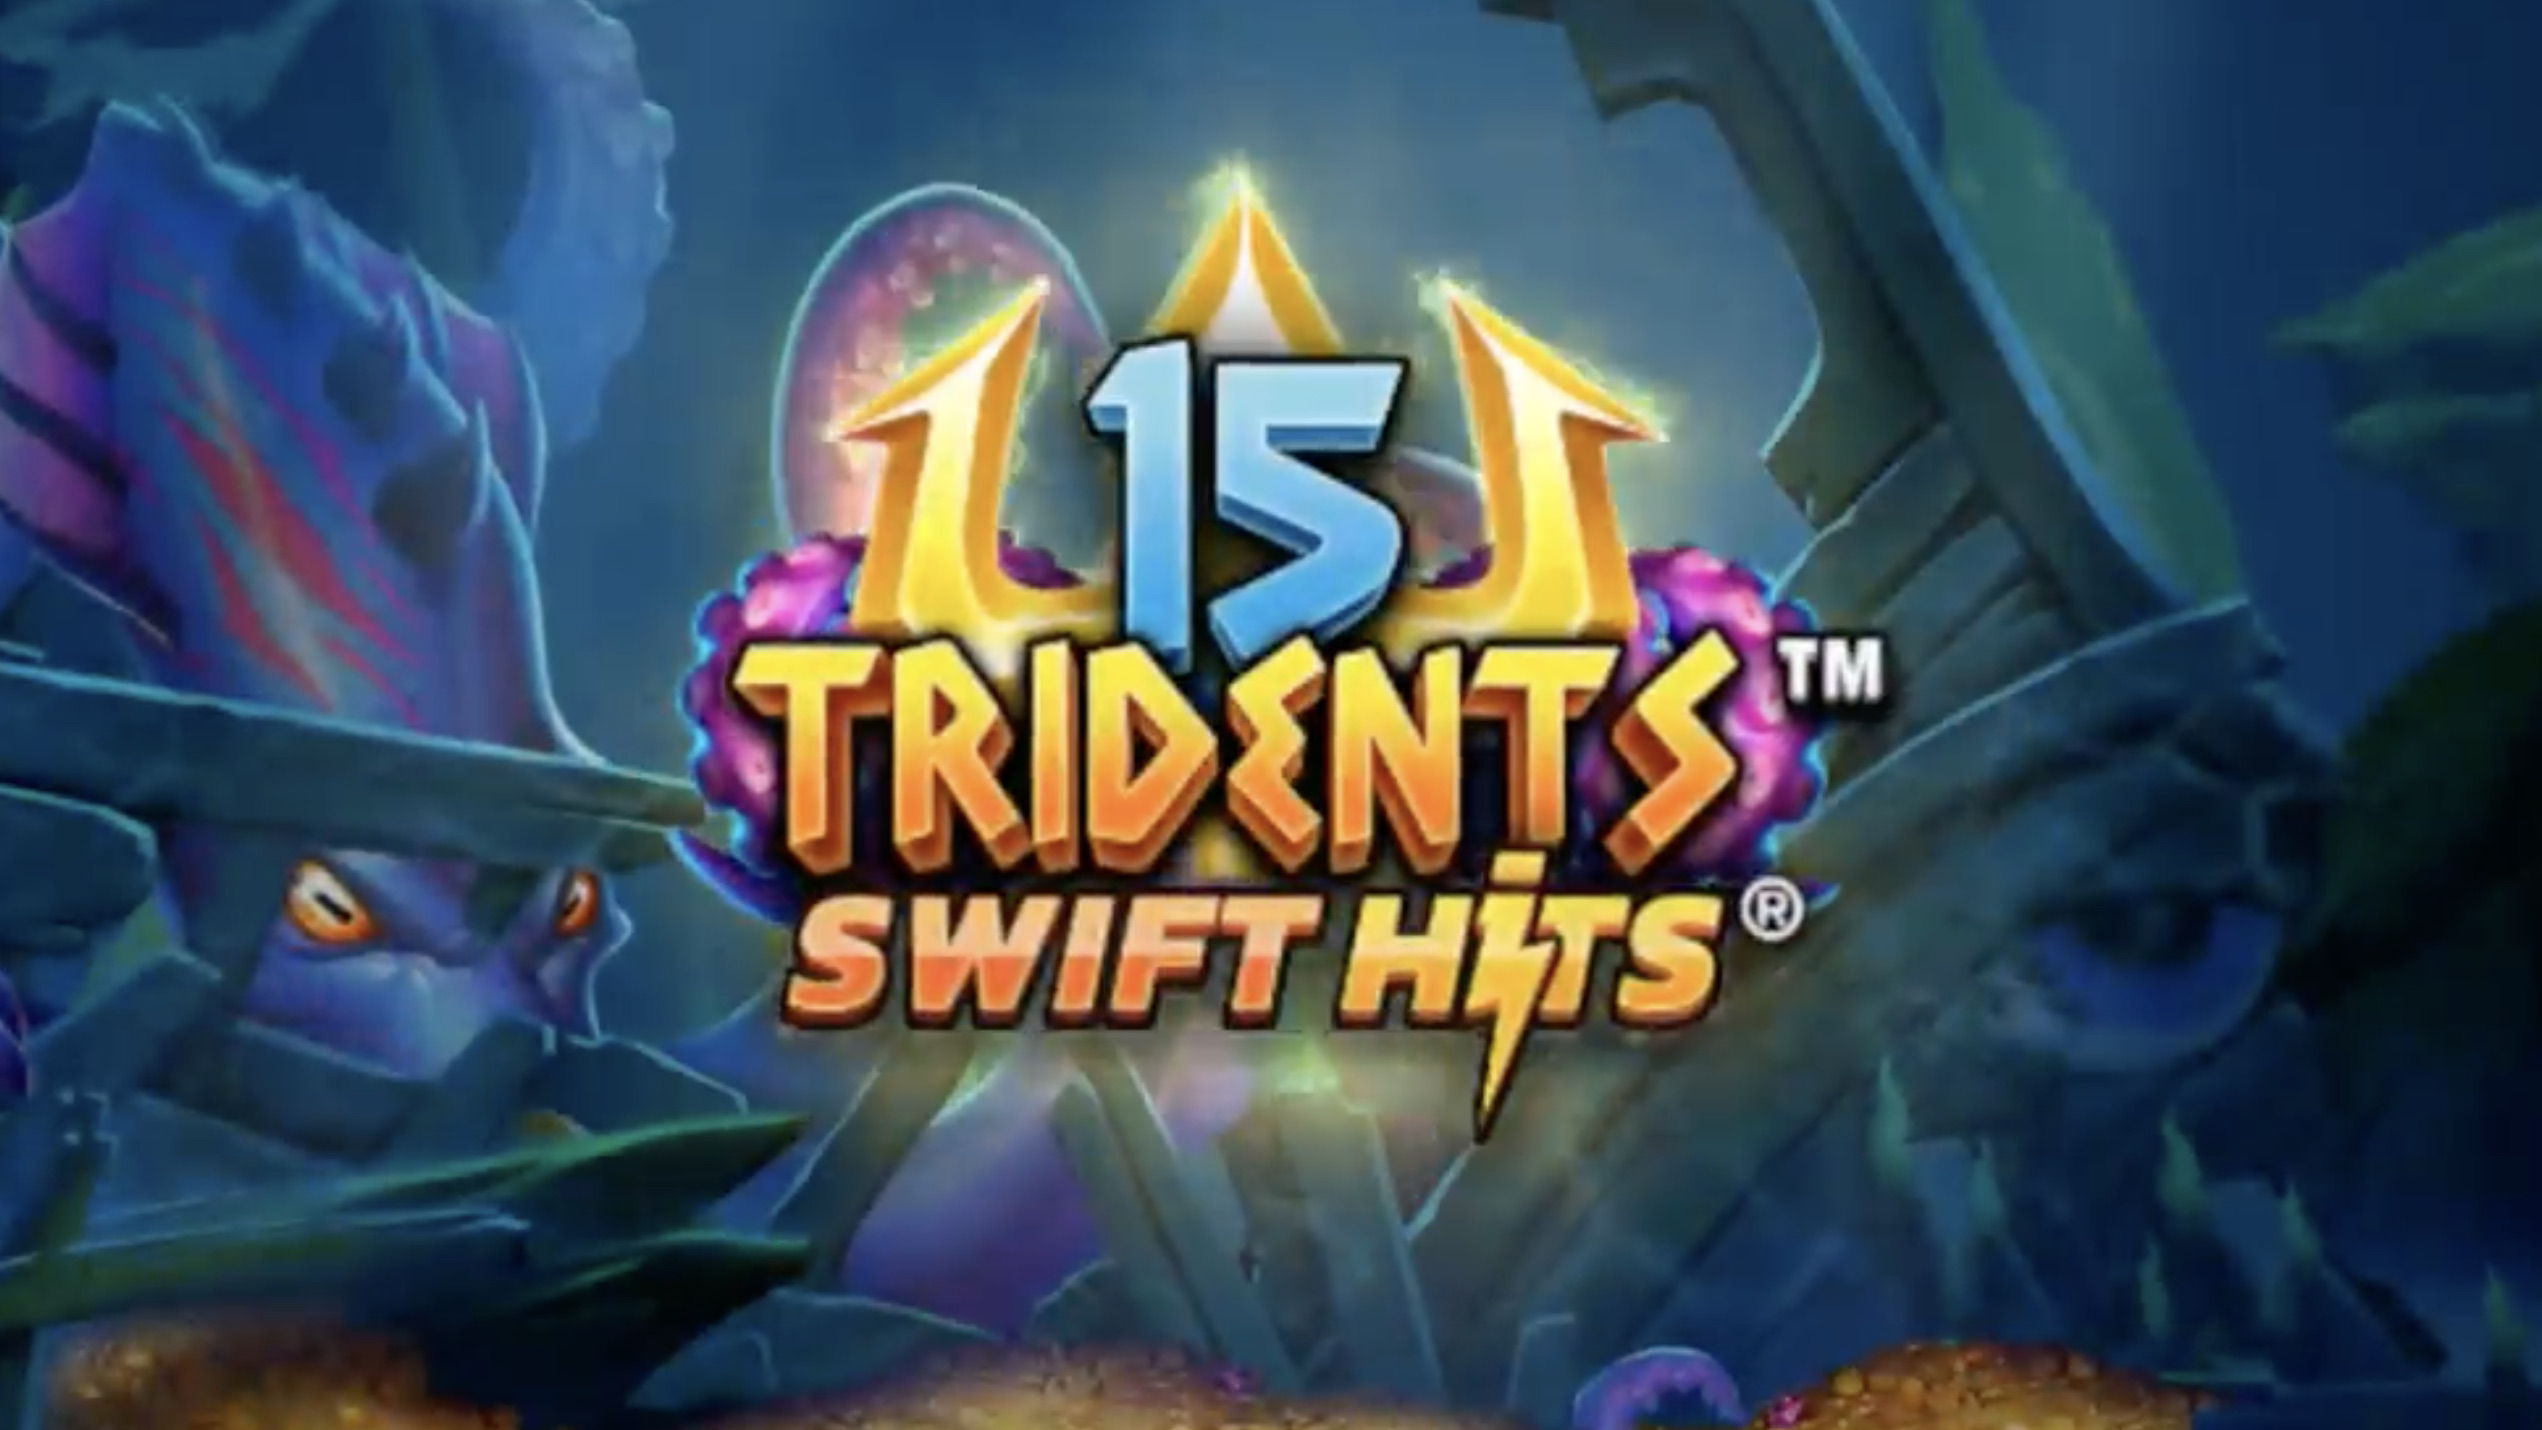 15 Tridents is a 5x4x2, 1,024-payline video slot that incorporates a maximum win potential of up to x10,000 the bet. 